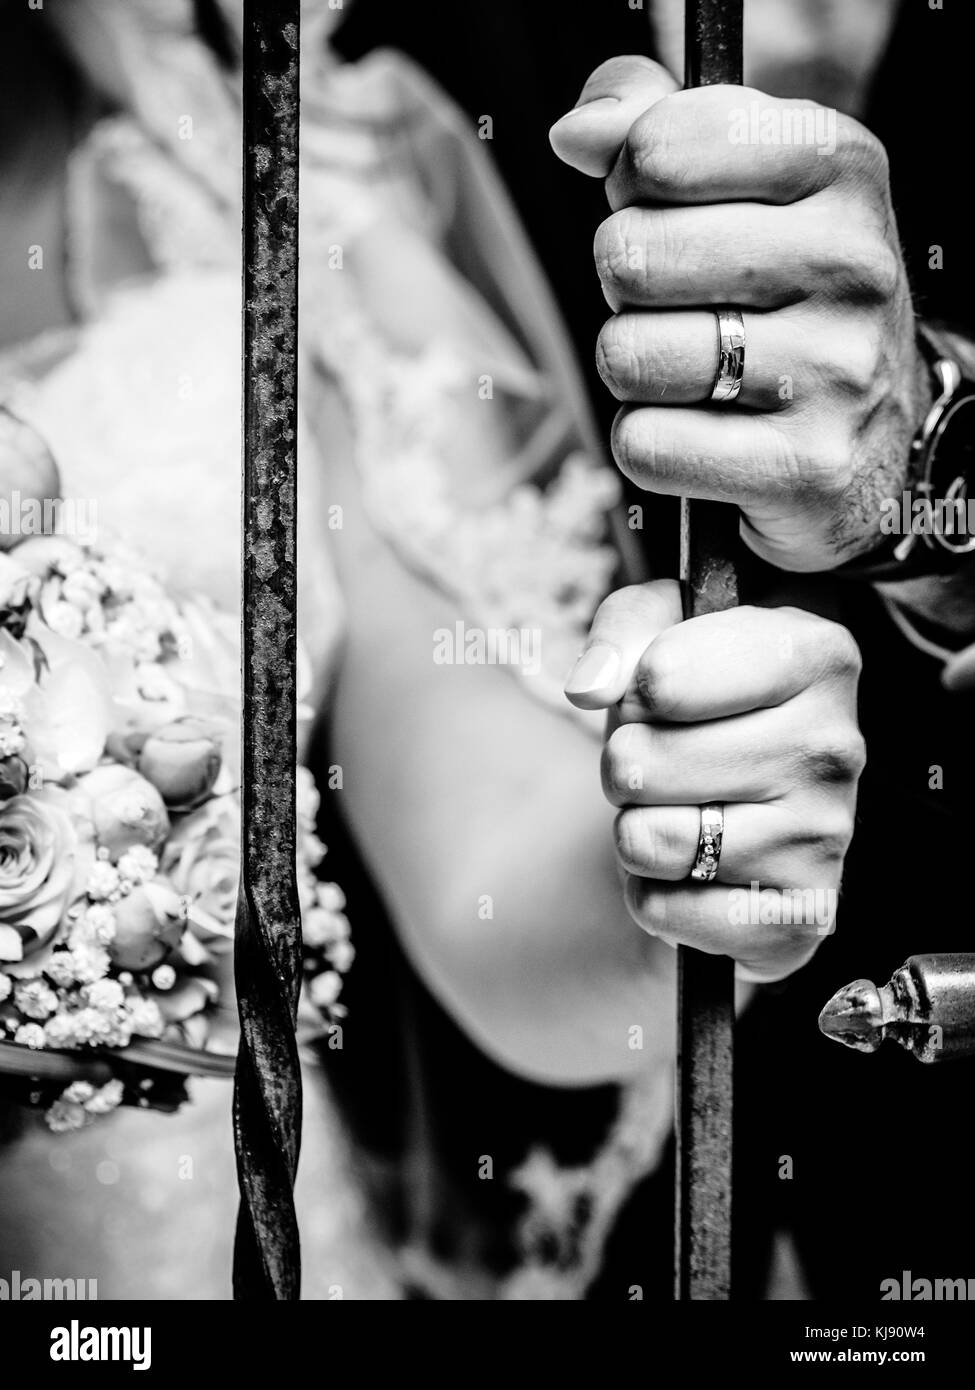 A newly-married couple puts their hands on an iron bar showing their wedding rings. Stock Photo